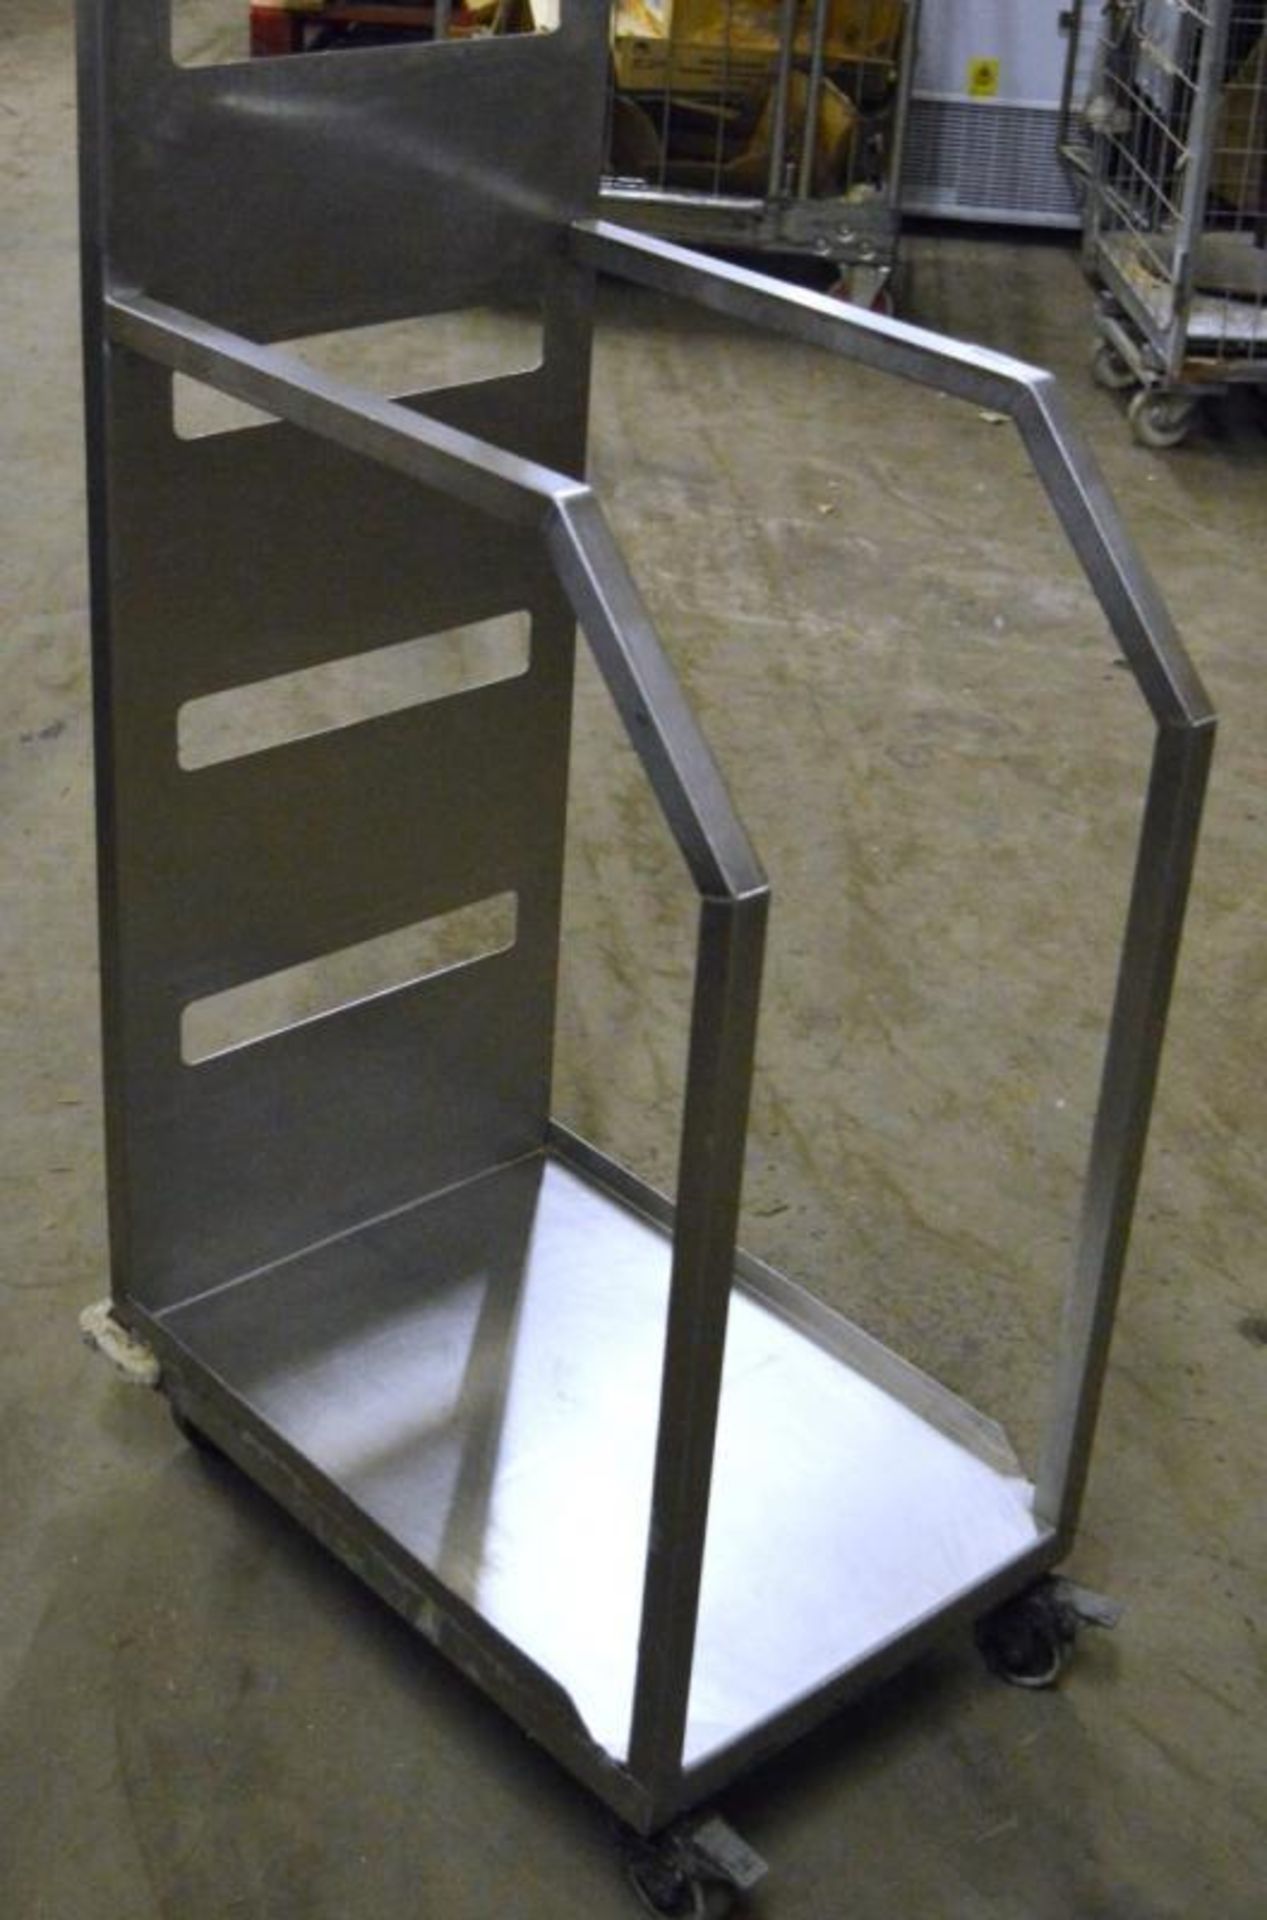 1 x Stainless Steel Tray Holding Trolley - H171 x W39 x D59 cms - CL282 - Ref J1058 - Location: Bolt - Image 2 of 2